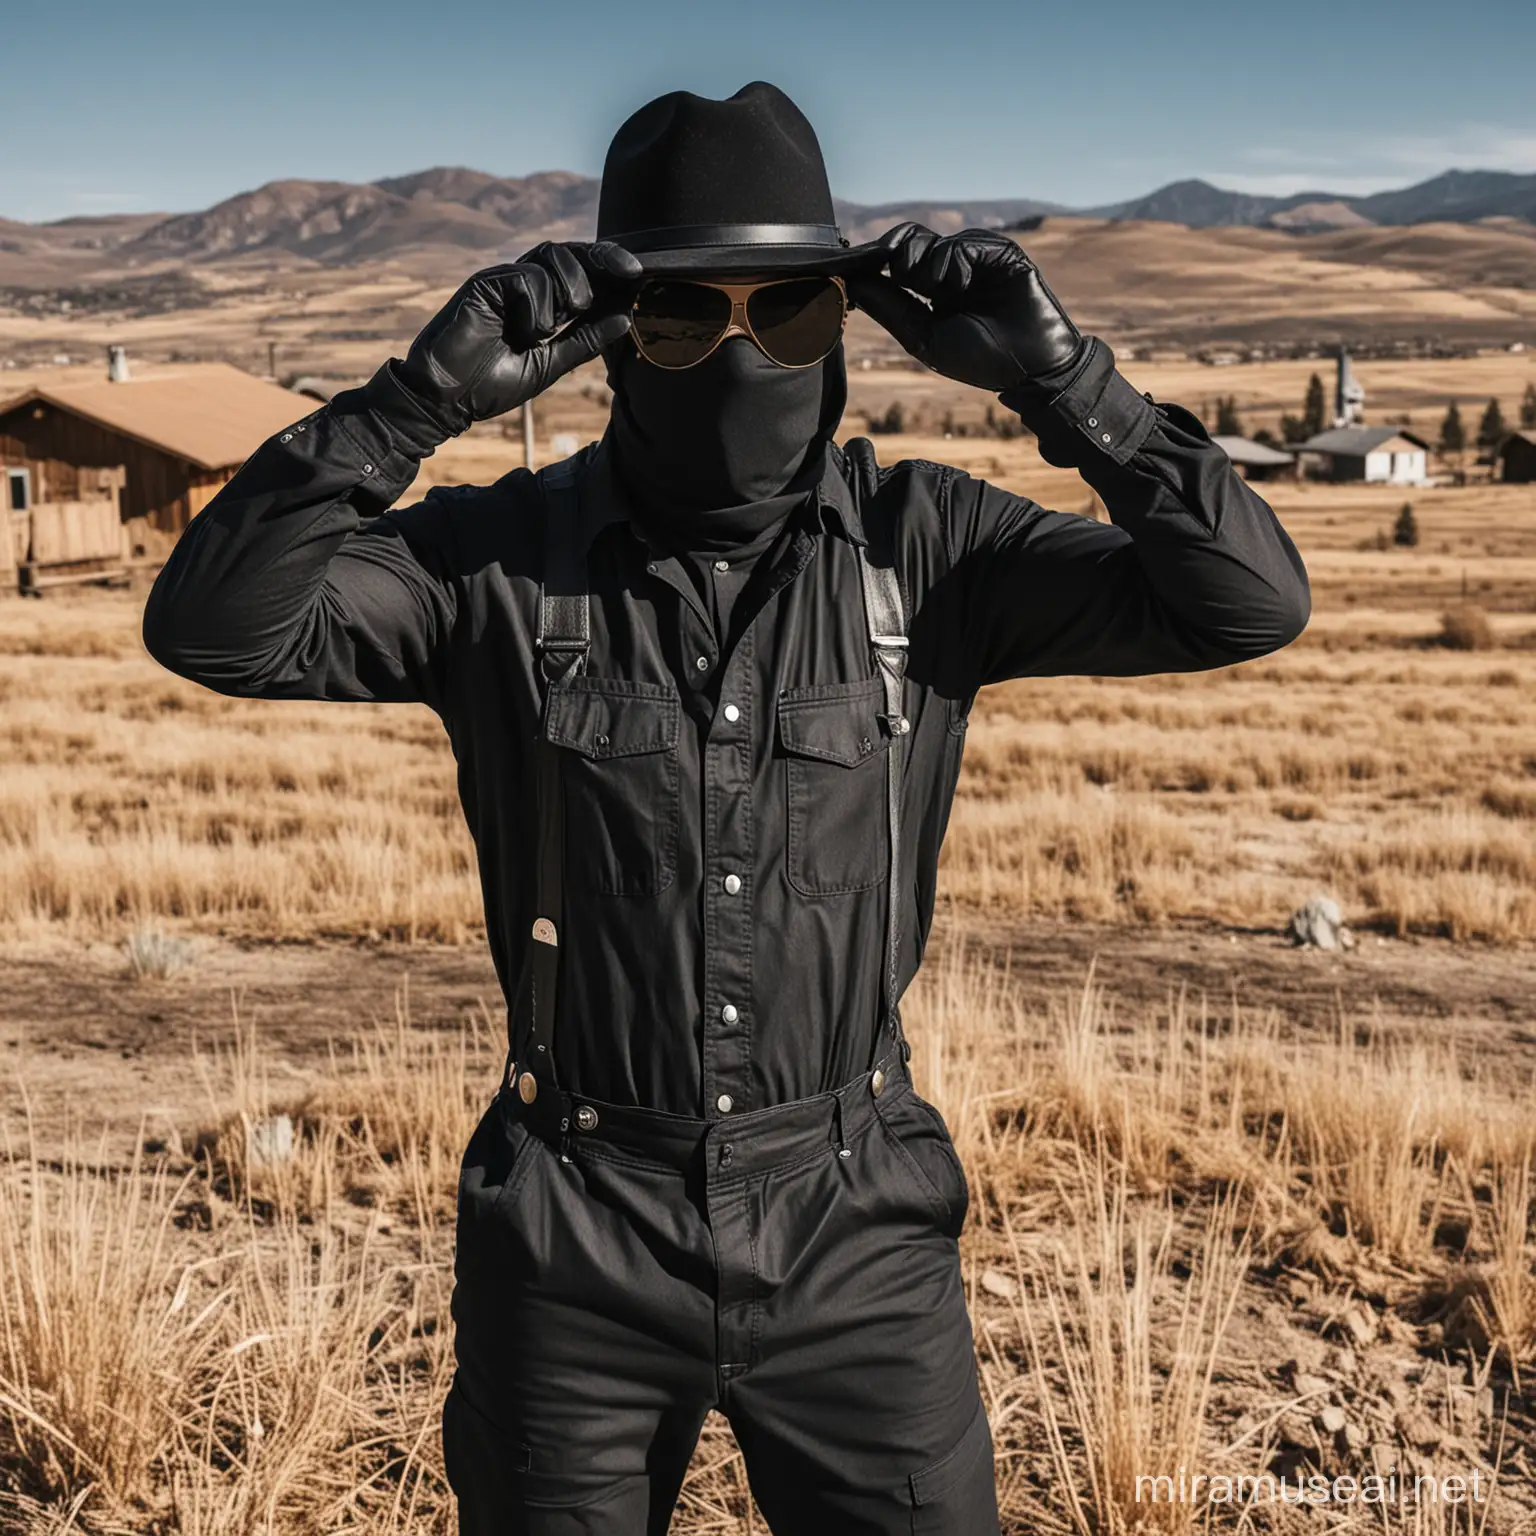 Mysterious Cowboy in Rural Setting Sending Signals